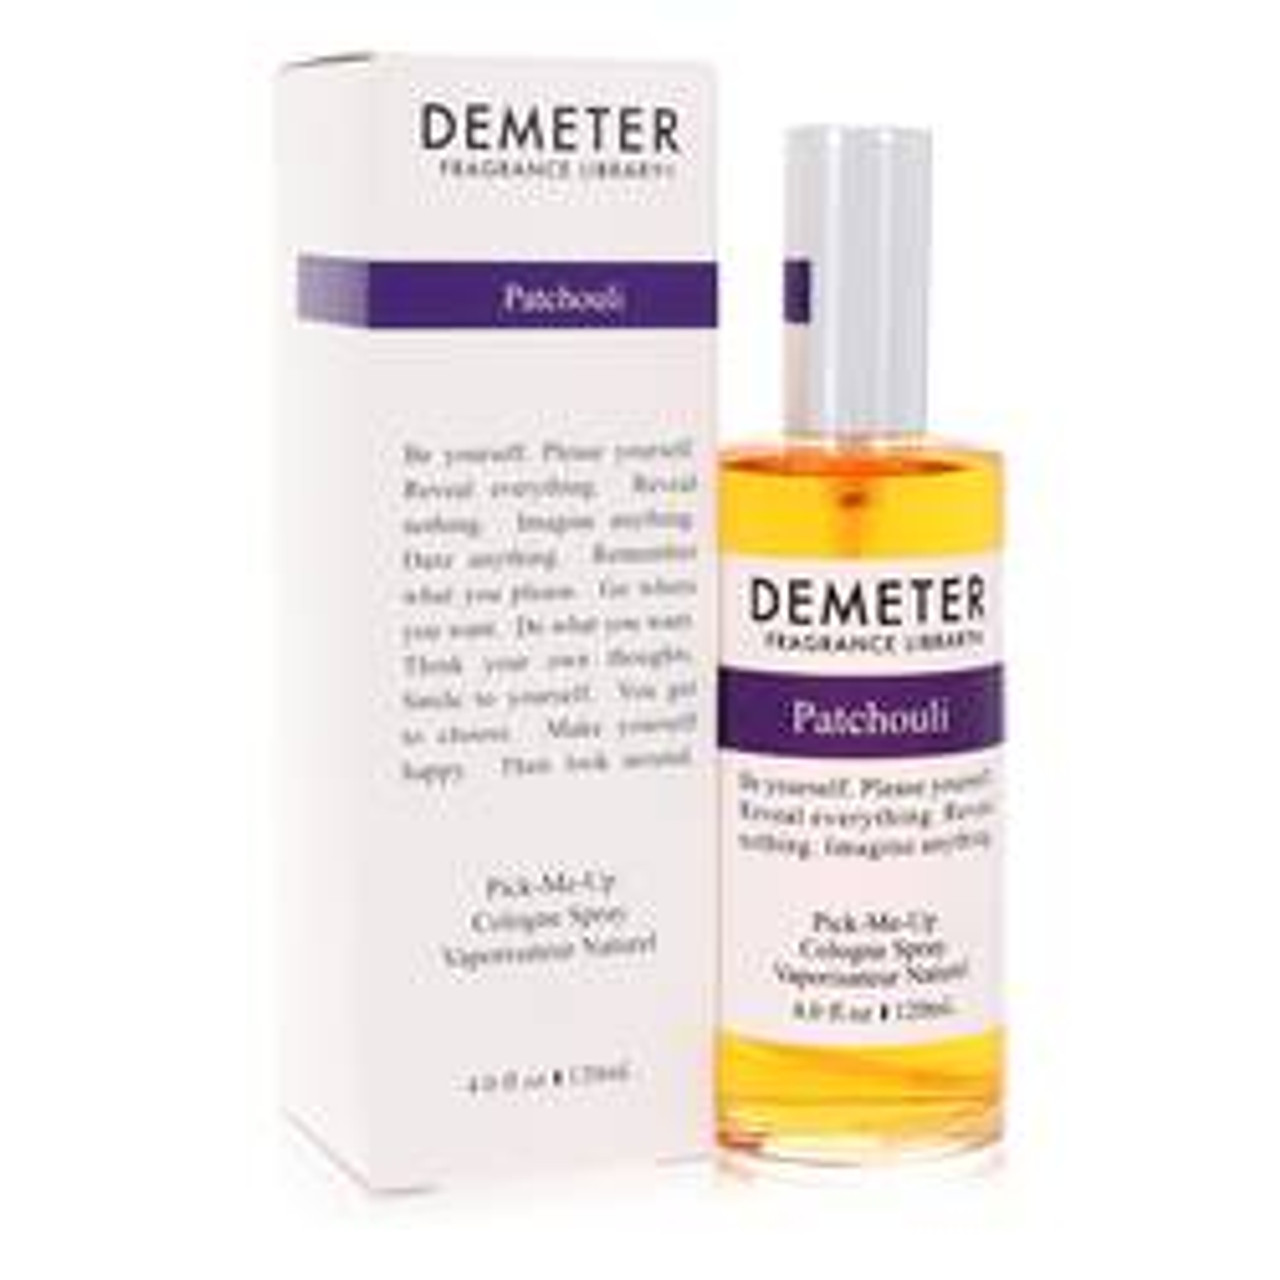 Demeter Patchouli Perfume By Demeter Cologne Spray 4 oz for Women - [From 79.50 - Choose pk Qty ] - *Ships from Miami